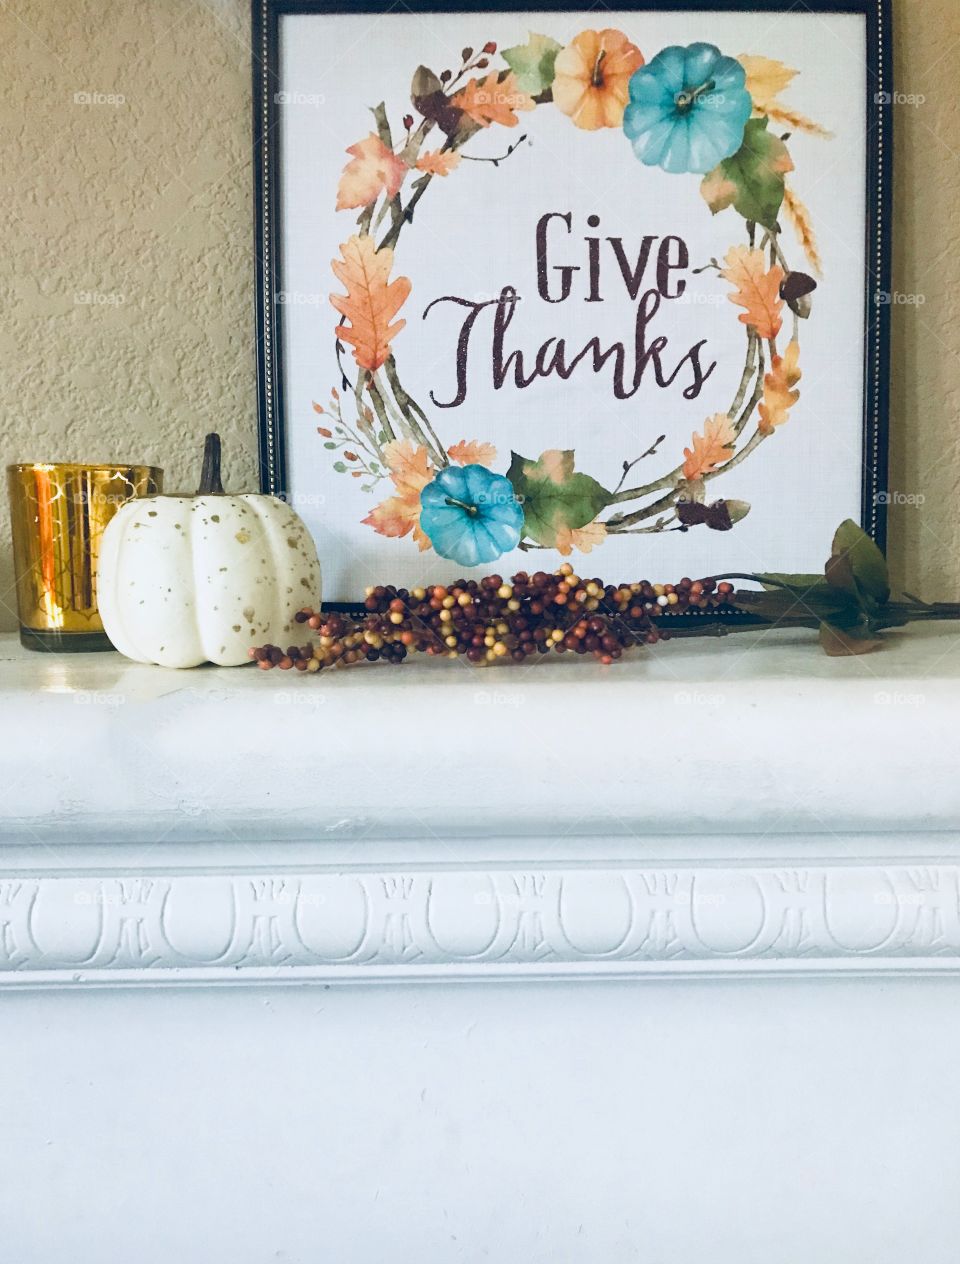 Give thanks, Happy thanksgiving holiday sign celebrating the fall season. USA, America 